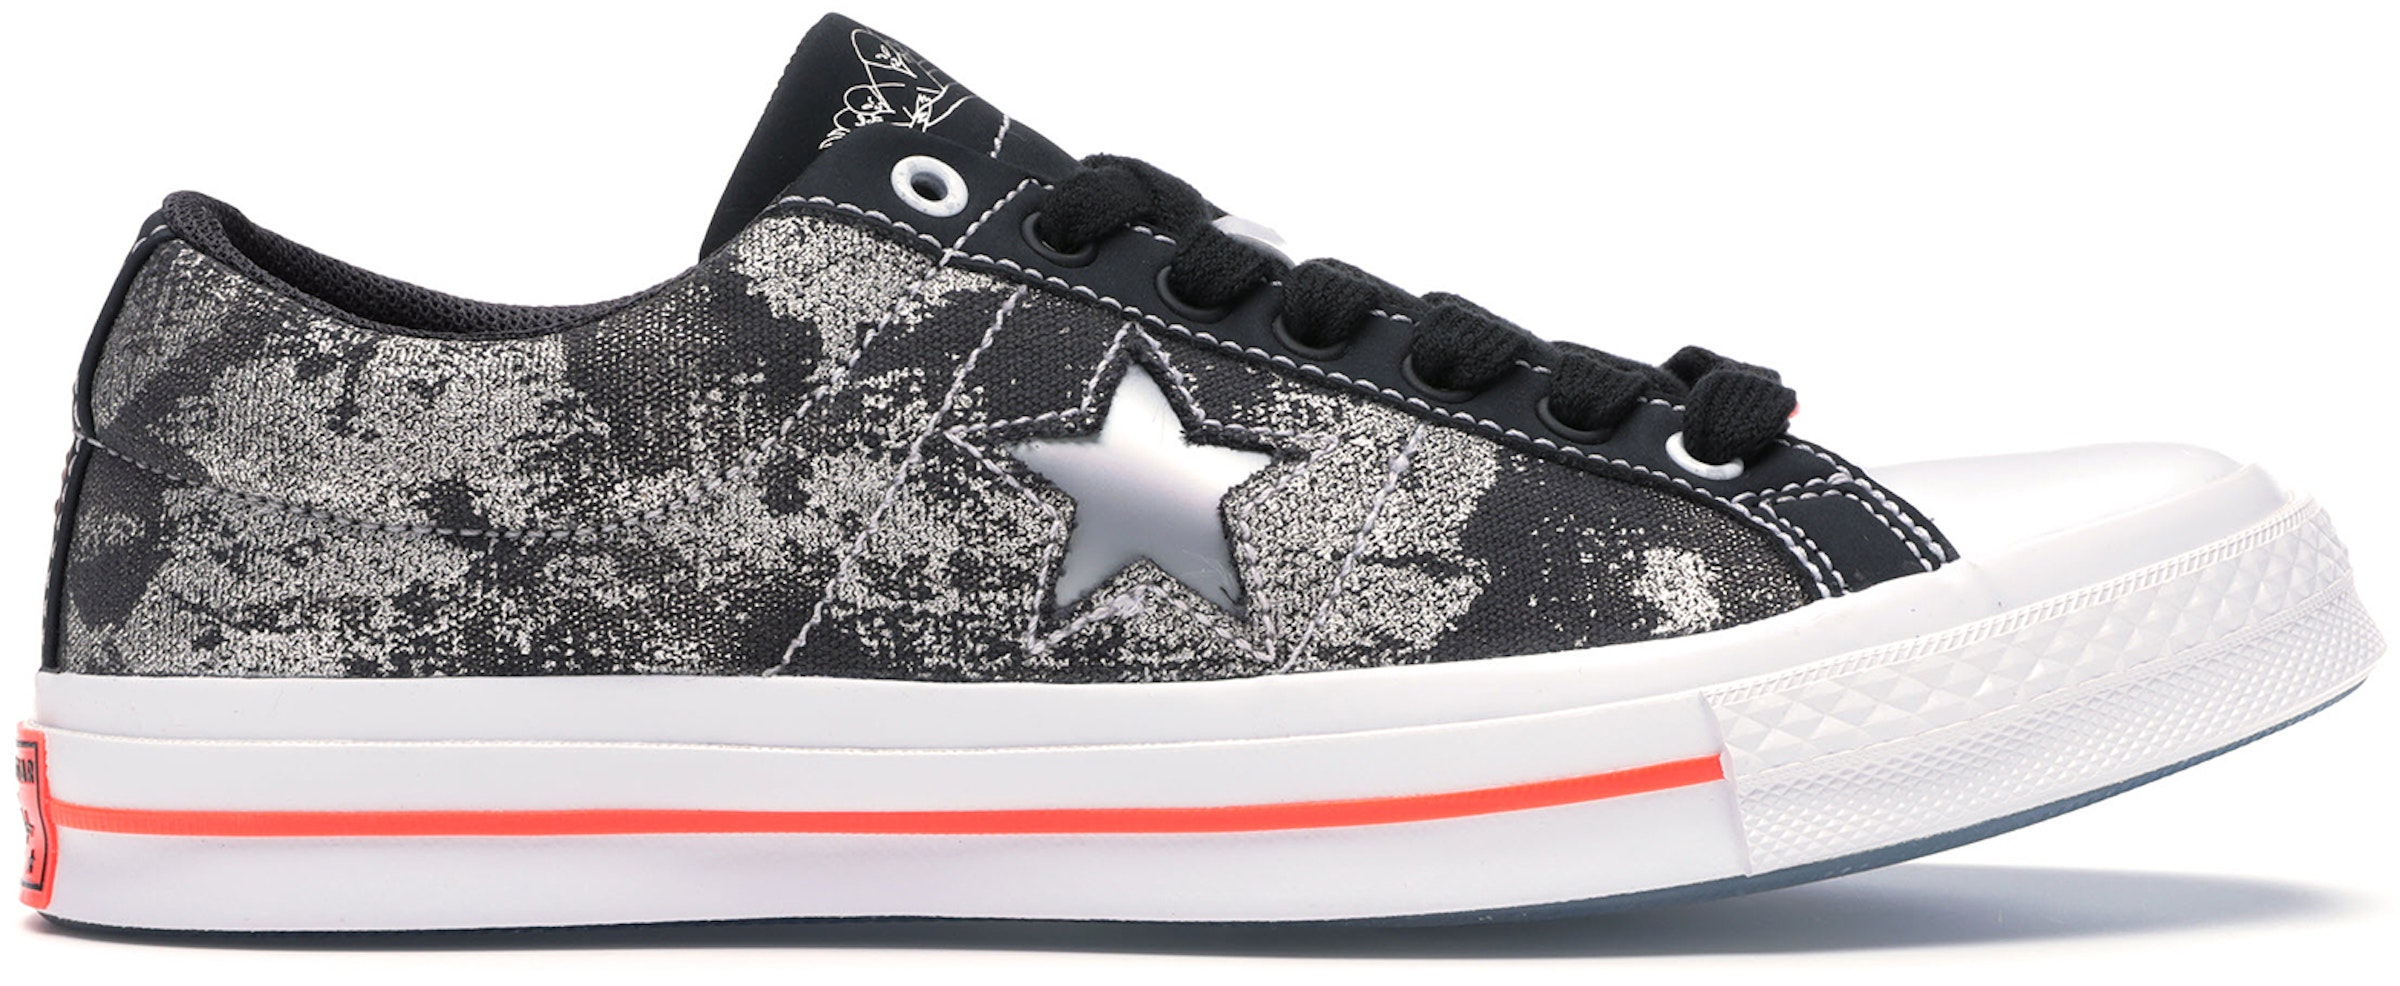 Converse One Star Shoes Sneakers StockX